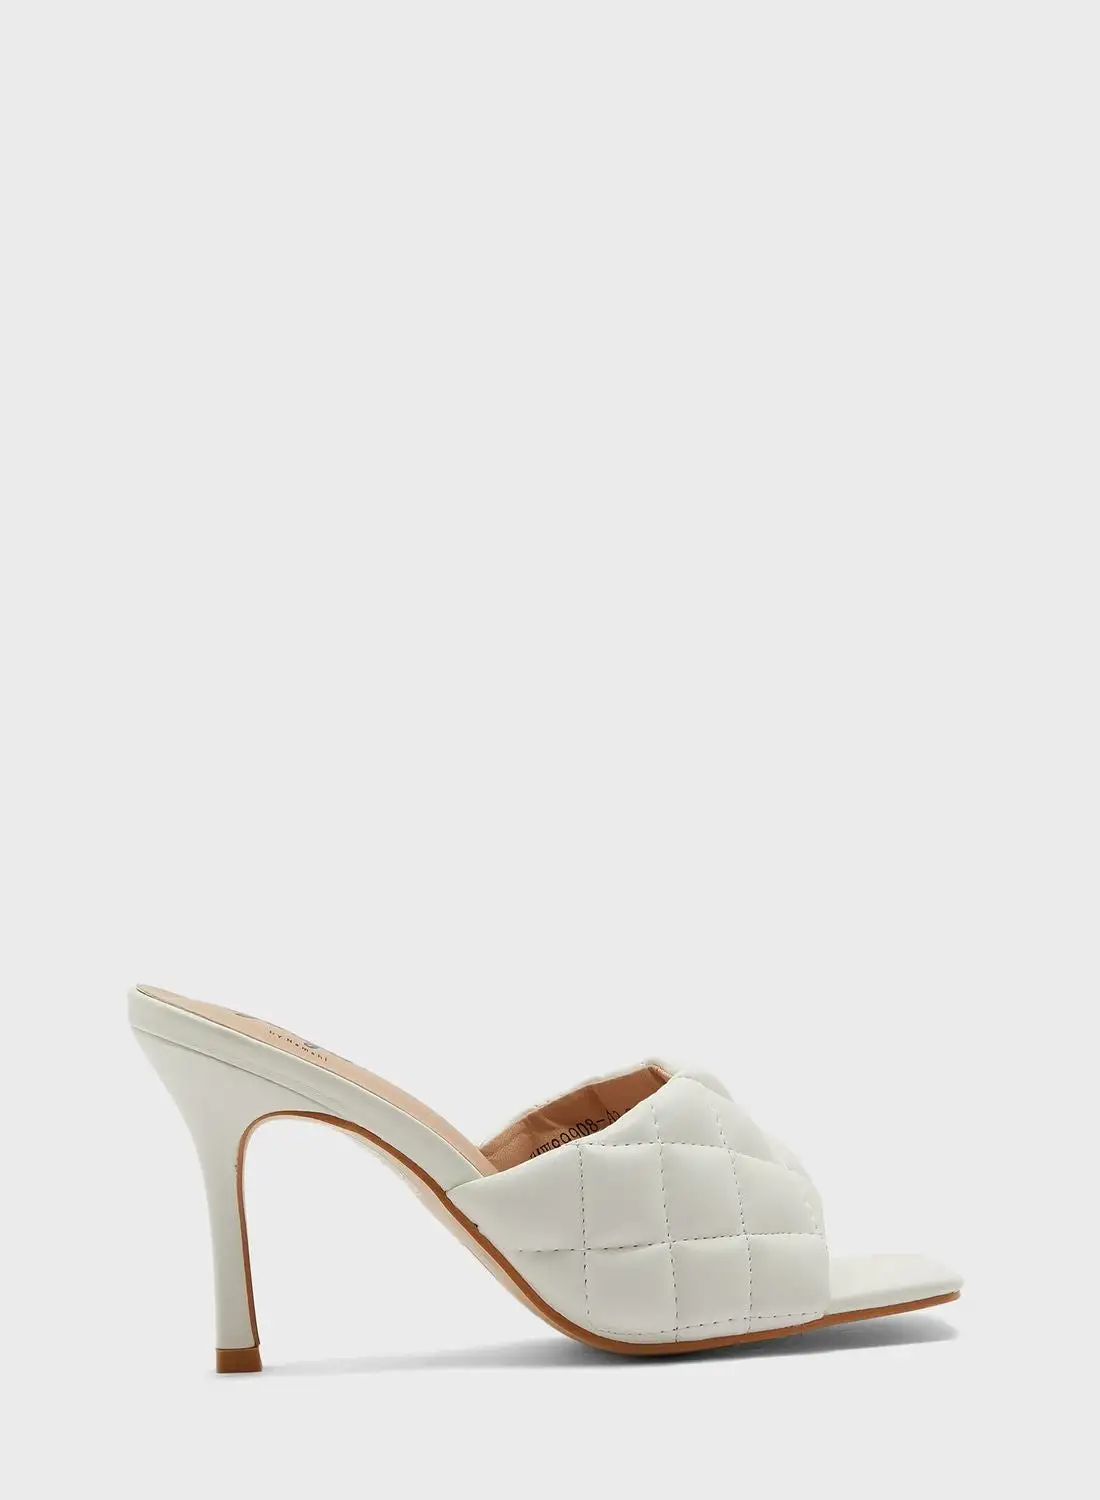 Ginger Quilted Square toe sandal